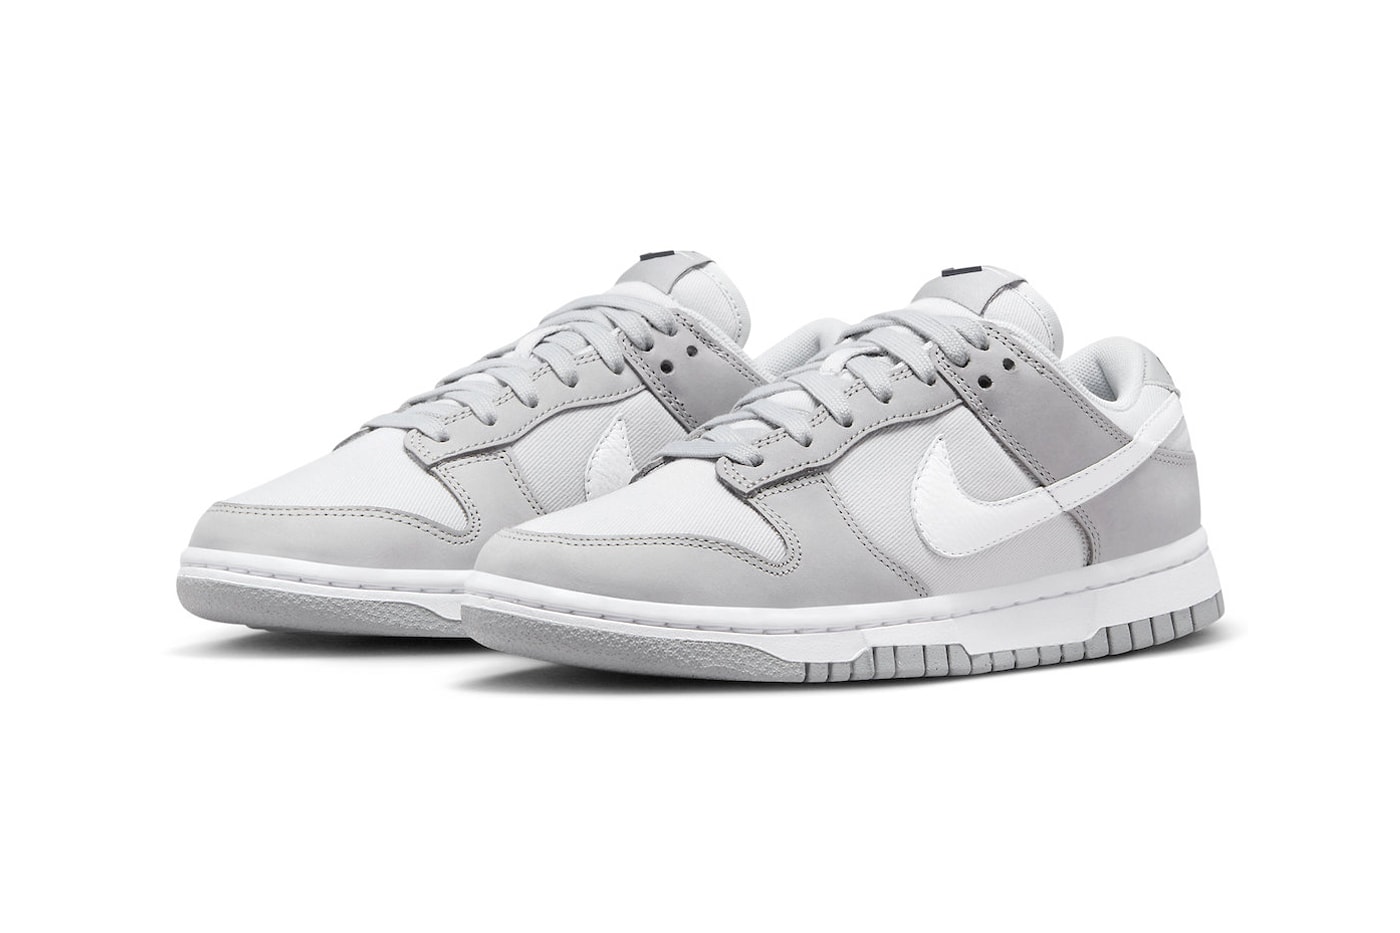 Official Look at the Nike Dunk Low "Light Smoke Grey" Light Smoke Grey/White-Photon Dust FB7720-002 low top sneakers shoes